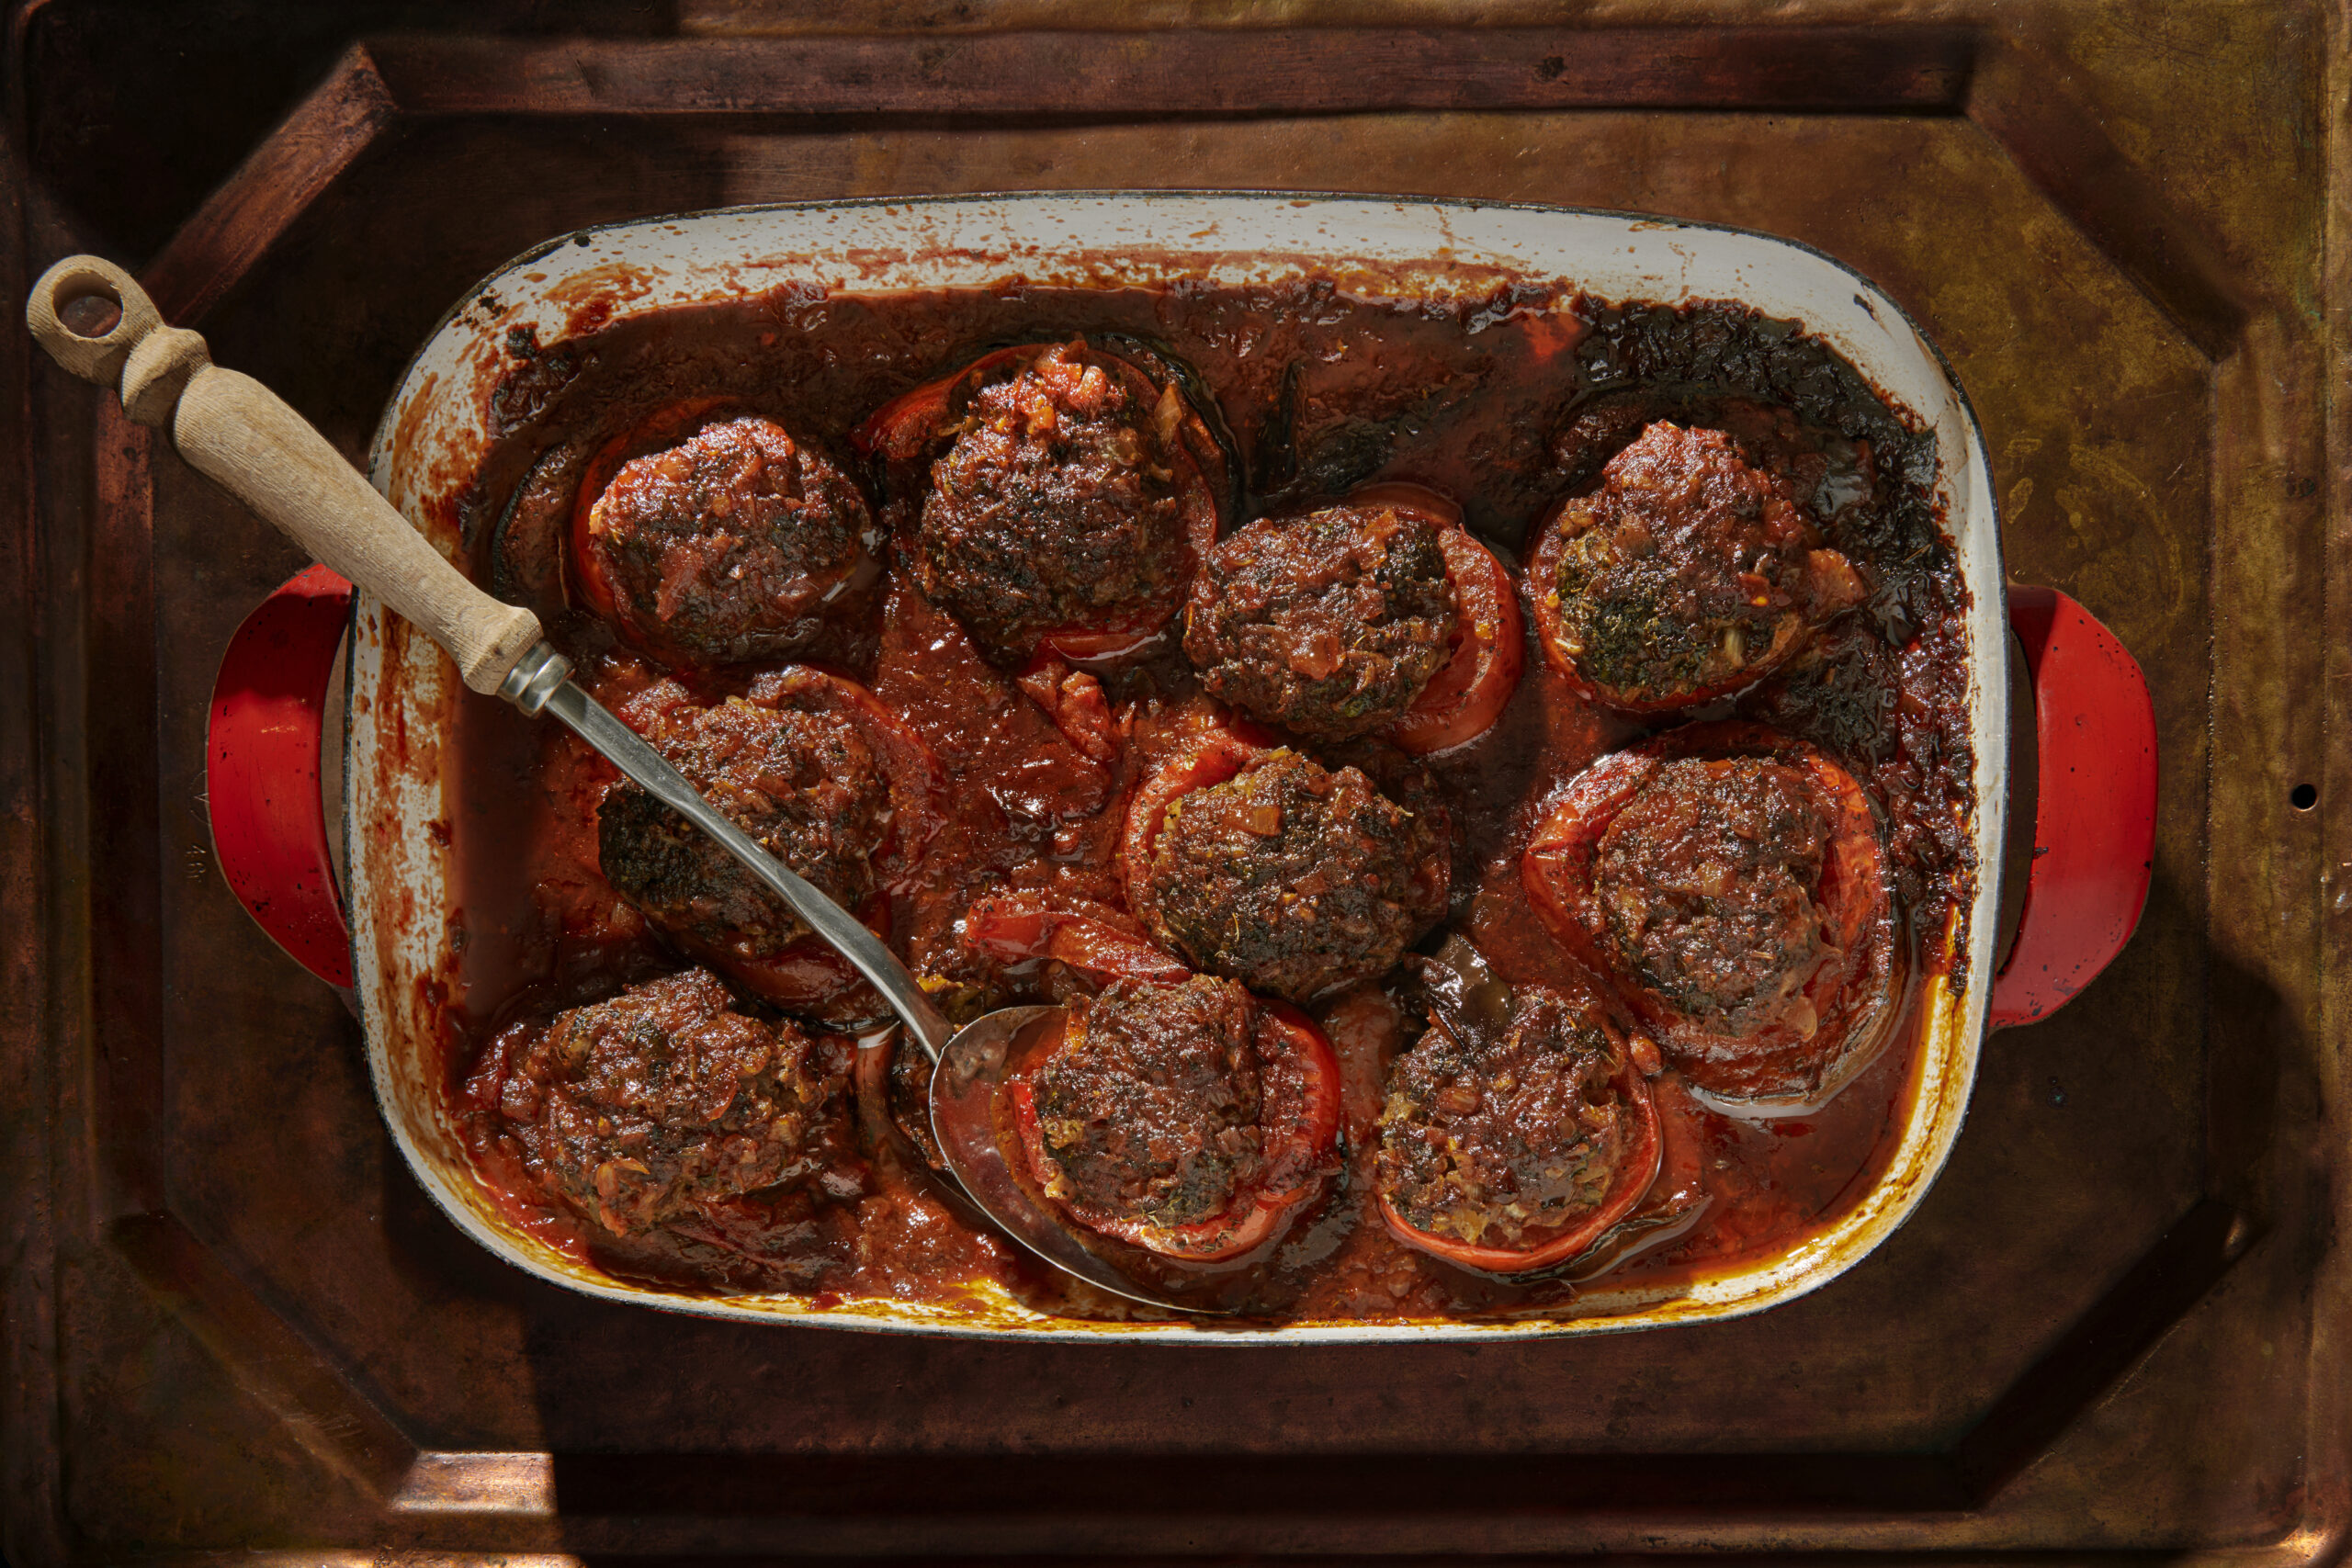 Beef stuffed vegetables in red baking dish with serving spoon